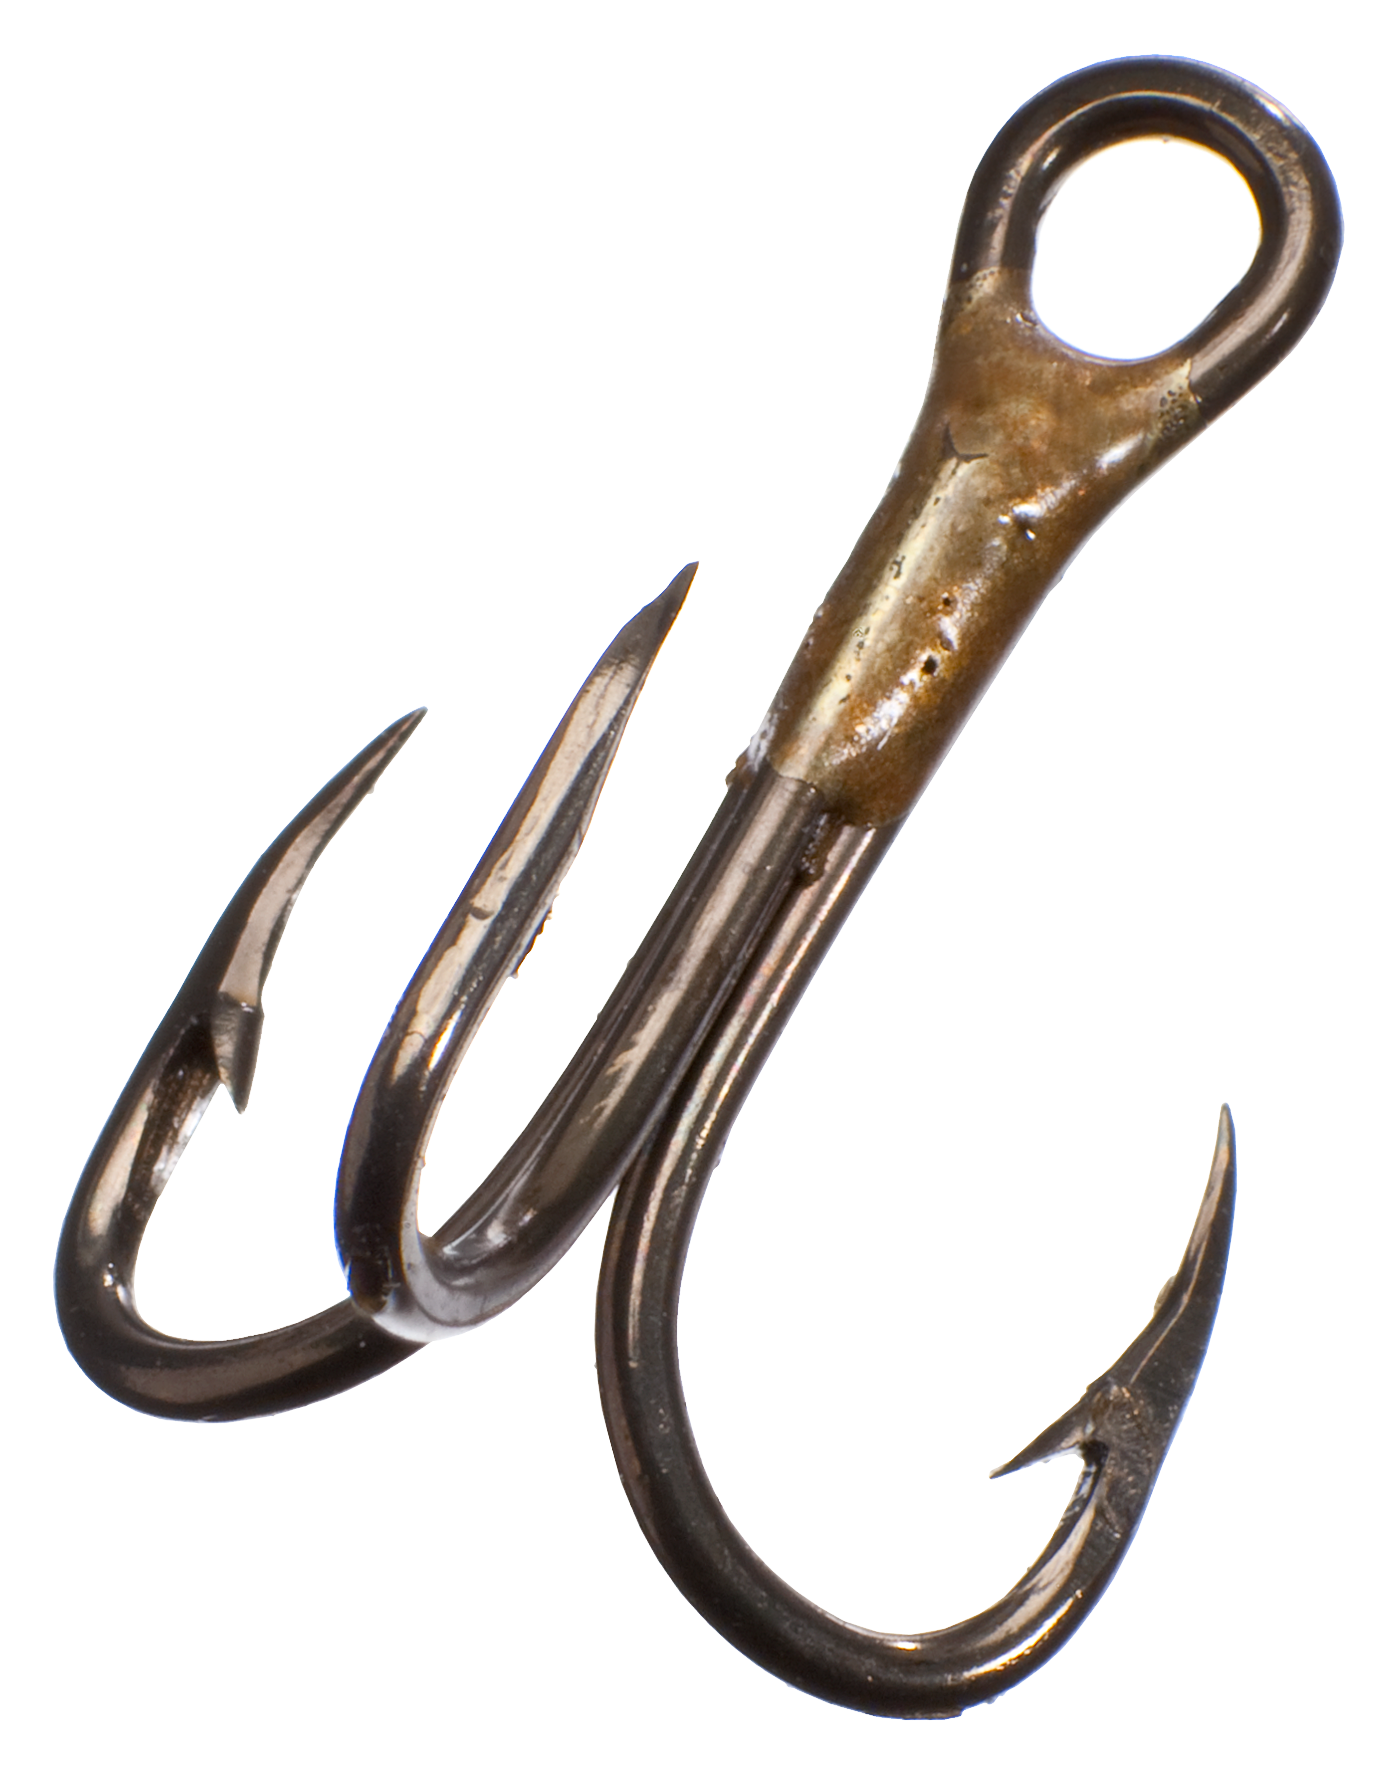 Eagle Claw Lazer Sharp Wide Bend Hooks, Bulk Packs of 50, Sizes 14 to 1  #L042FH - Al Flaherty's Outdoor Store